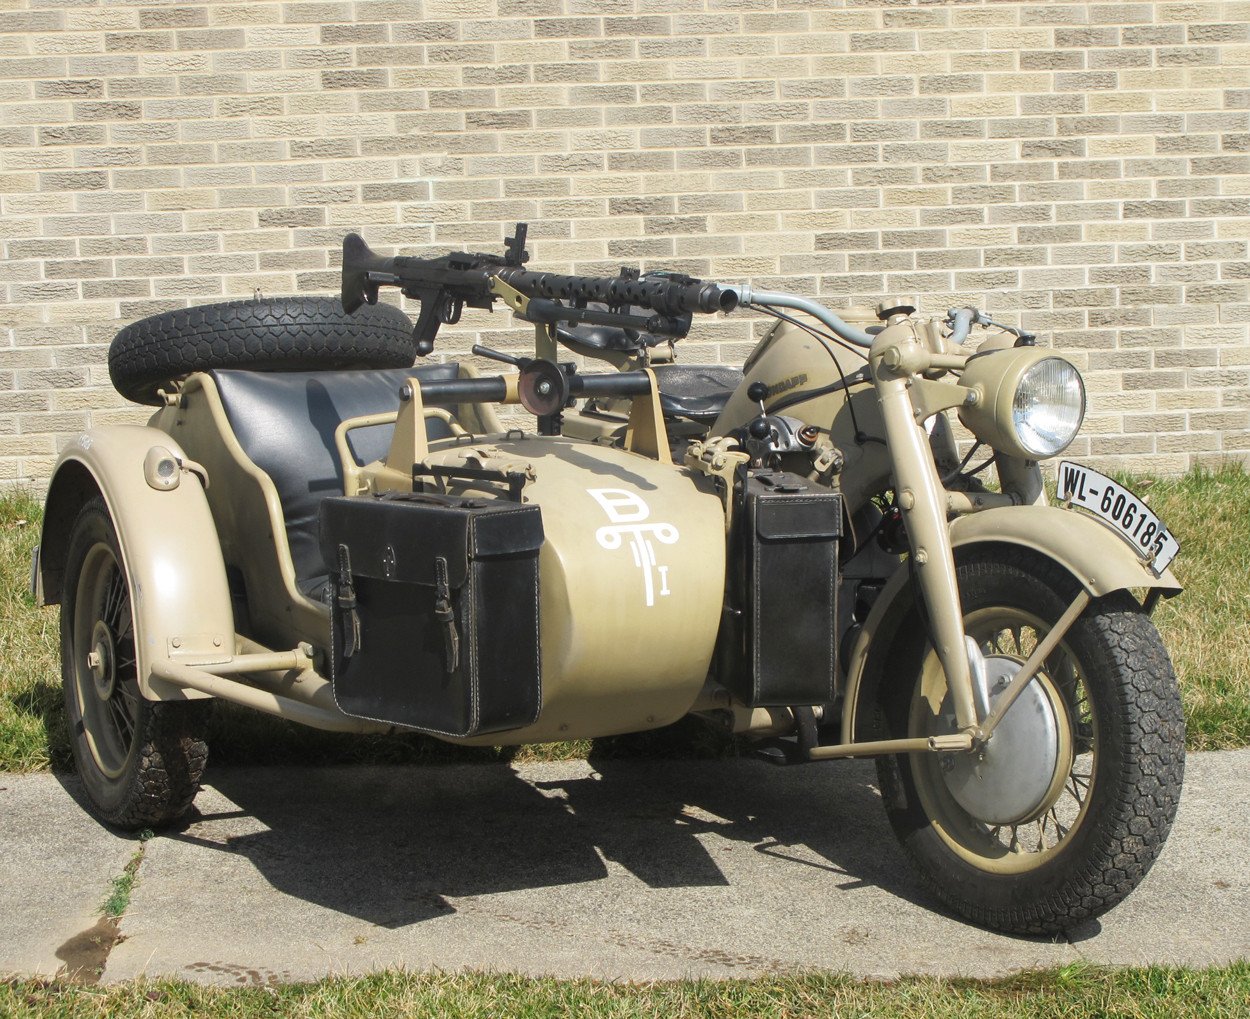 Original German WWII 1942 Zündapp KS 750 Motorcycle and Sidecar- Matched  Serial Numbers – International Military Antiques